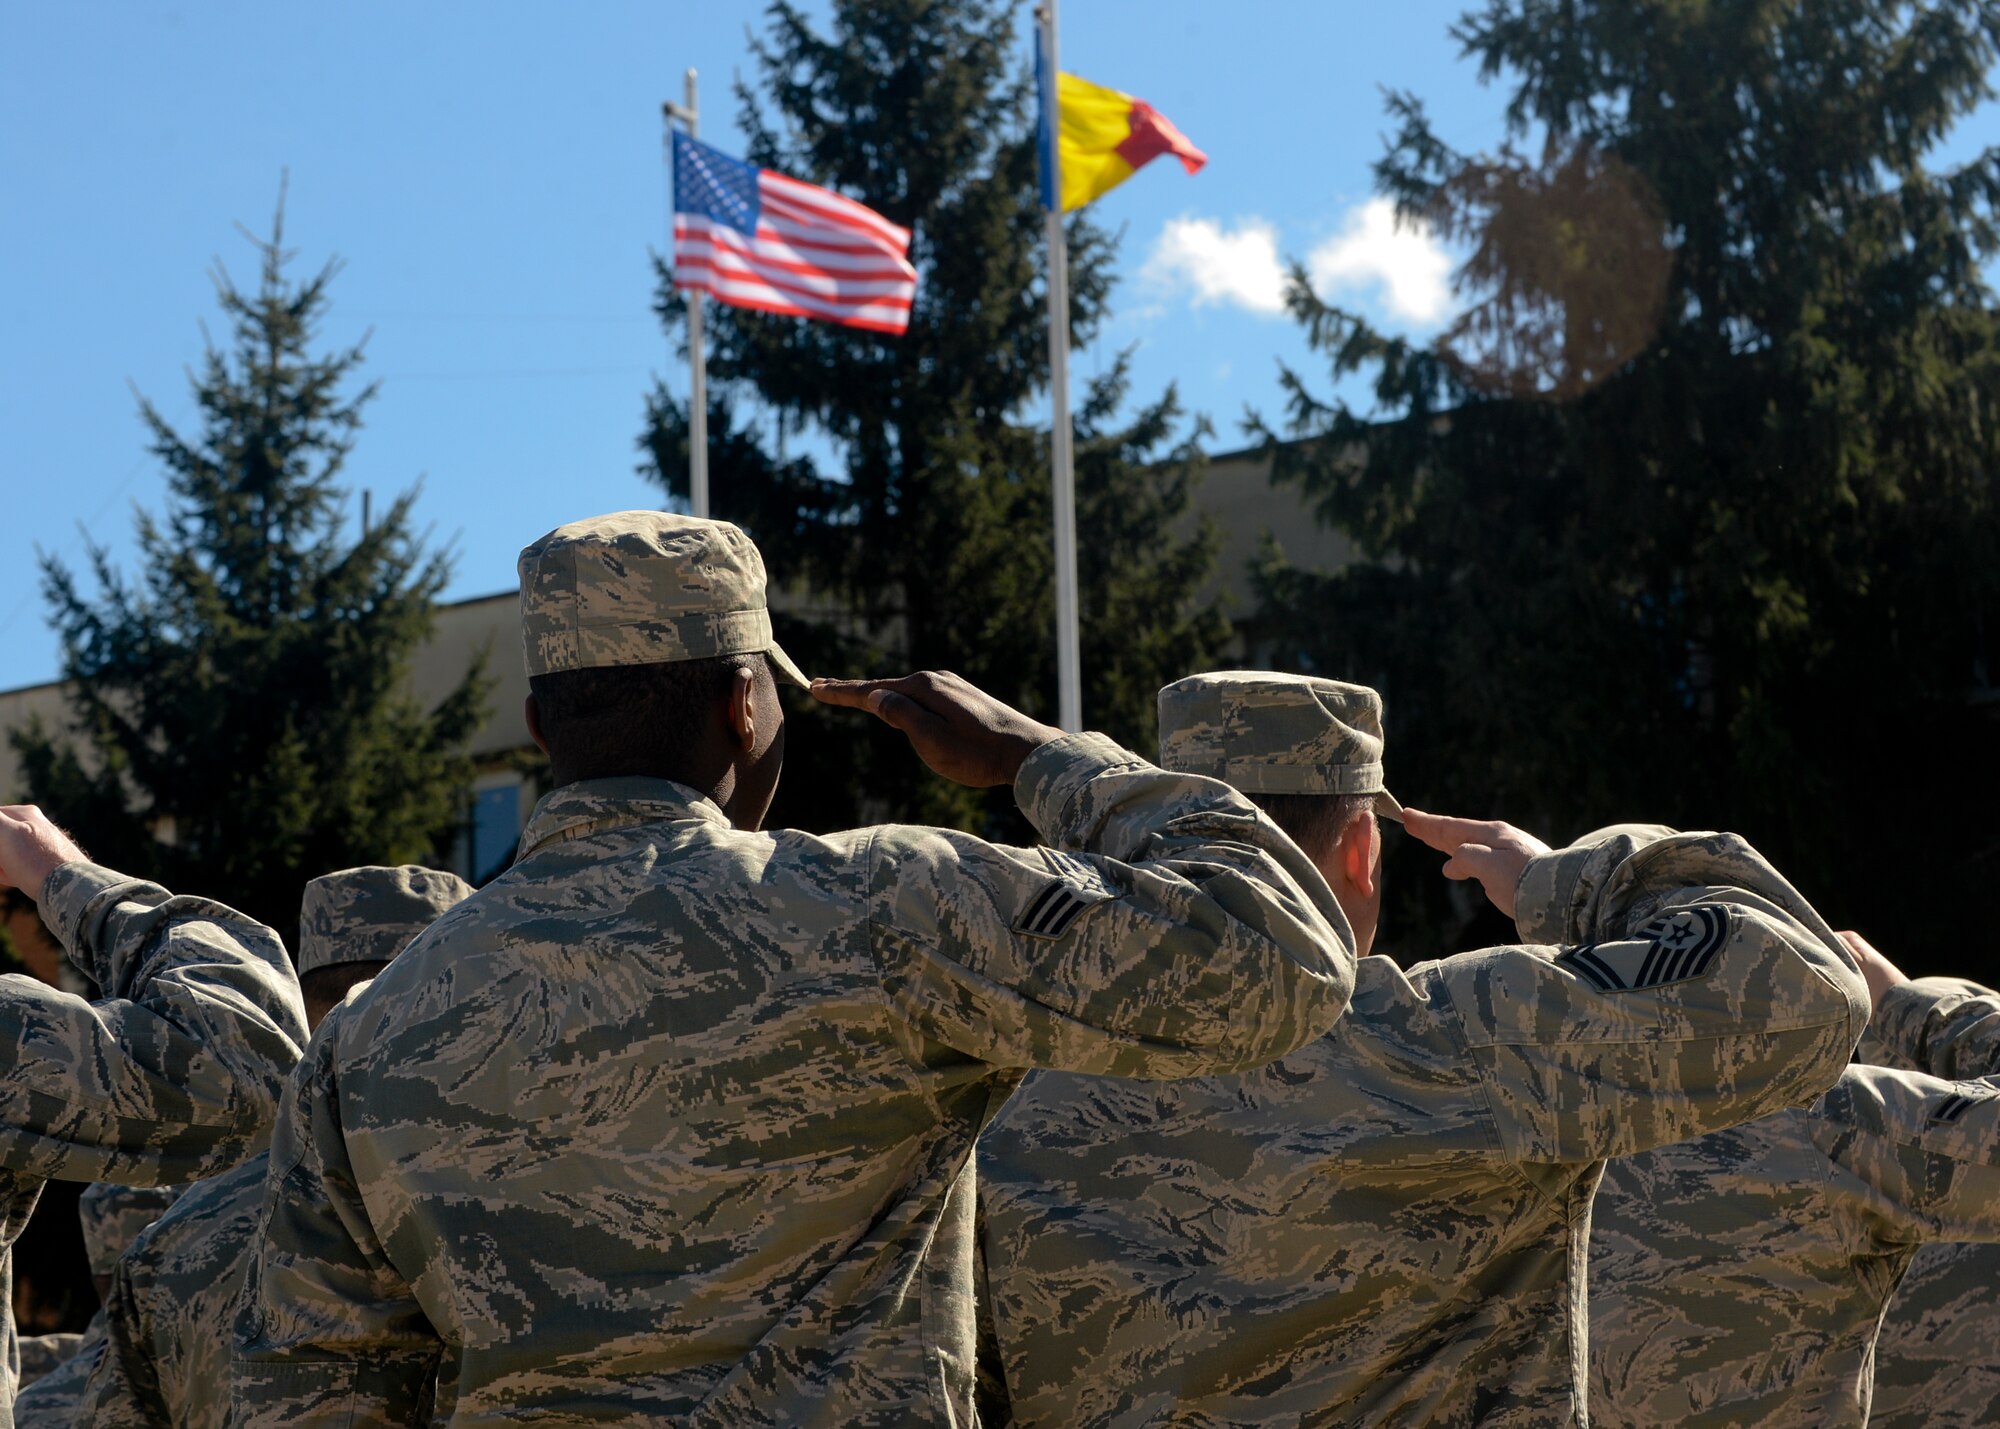 A flight of U.S. Air Force Airmen salute the U.S. and Romanian flags during the opening ceremony of Dacian Thunder 2015 at Campia Turzii, Romania, April 1, 2015. The U.S. and Romanian air forces will conduct training aimed to strengthen interoperability and demonstrate the countries' shared commitment to the security and stability of Europe.  (U.S. Air Force photo by Staff Sgt. Joe W. McFadden/Released)

